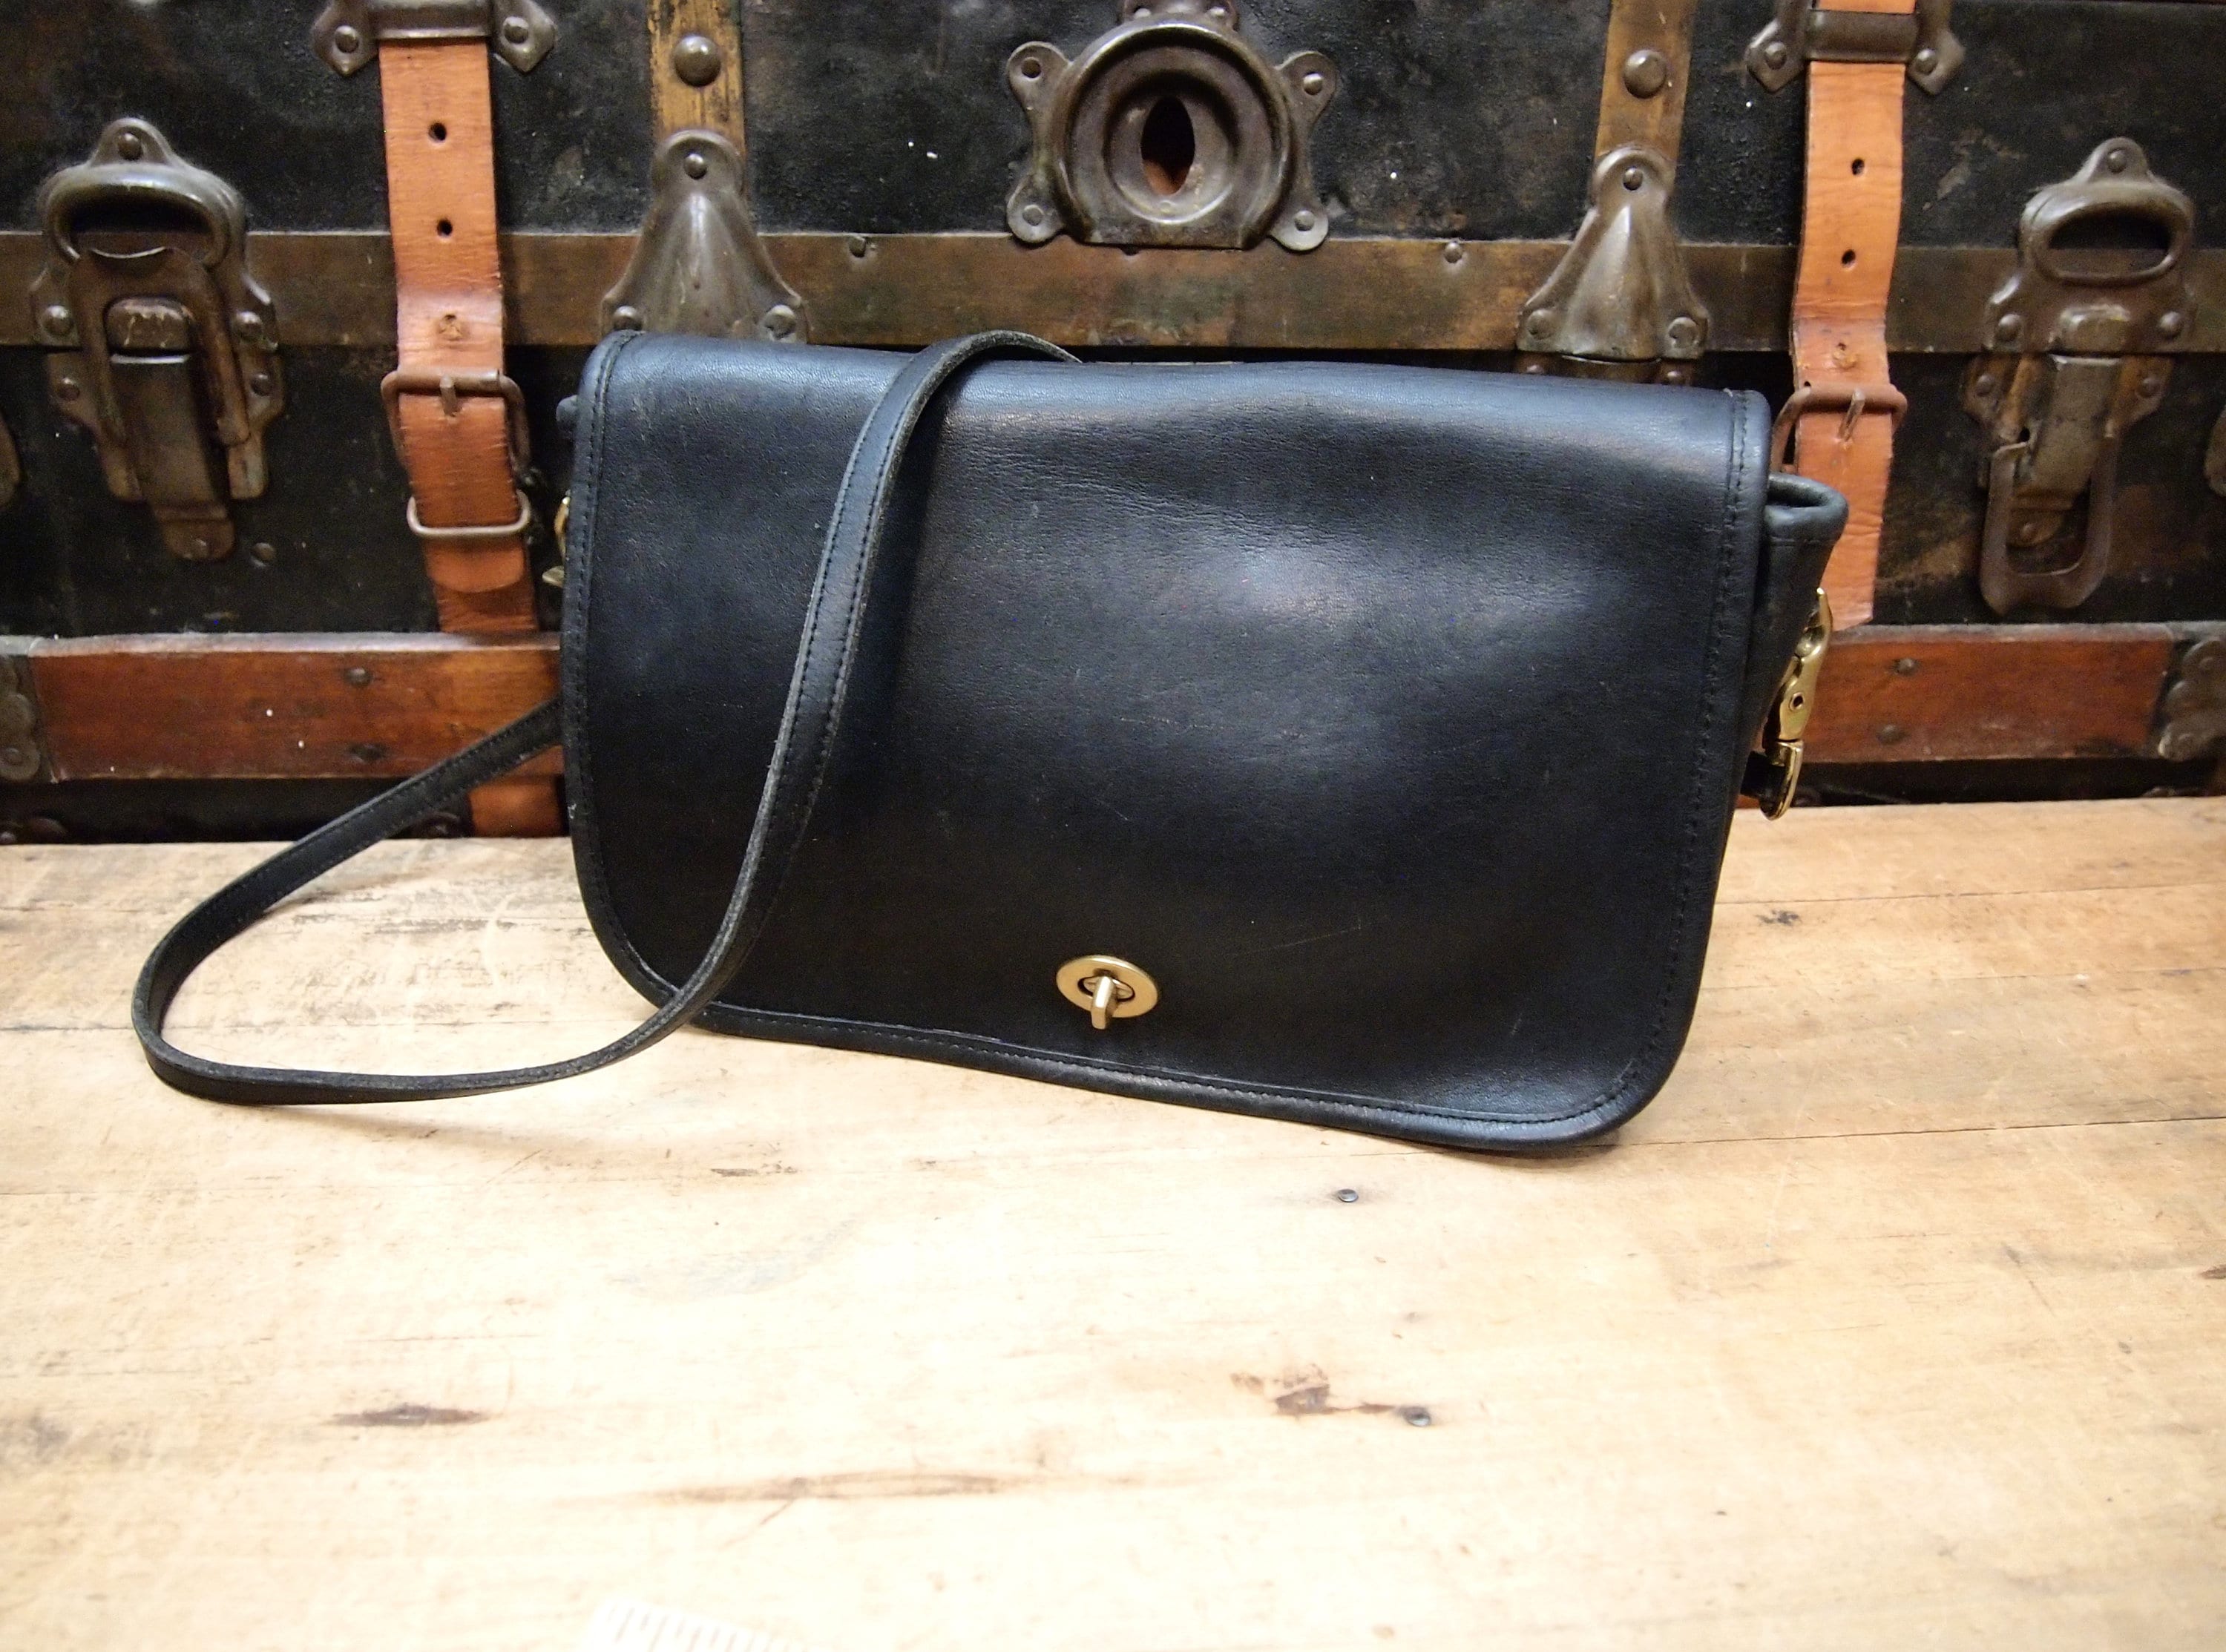 COACH Legacy Leather Penny Shoulder Purse in Black